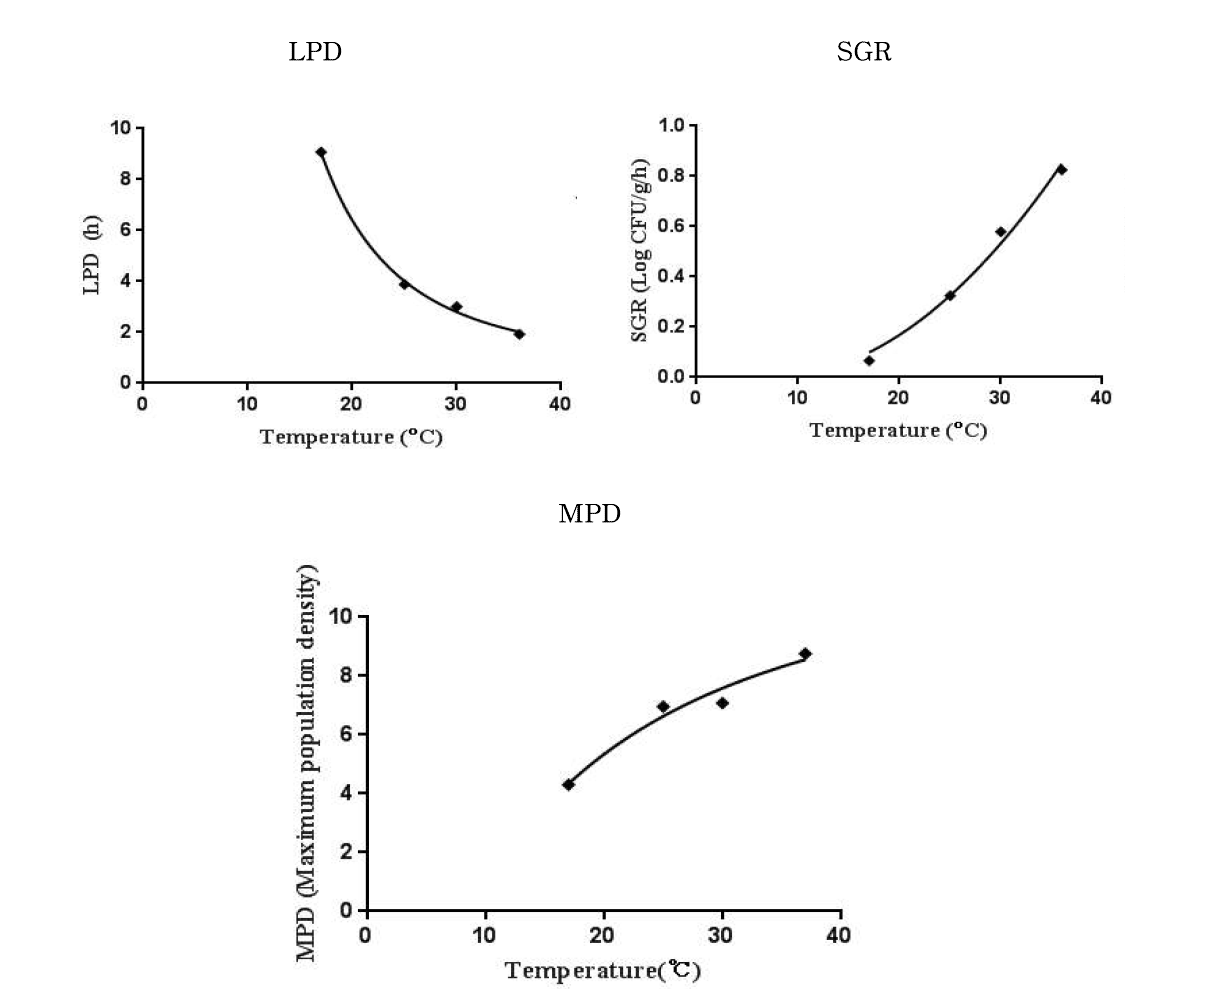 Secondary growth model for LPD, SGR and MPD of B. cereus in lunch box as a function of temperature